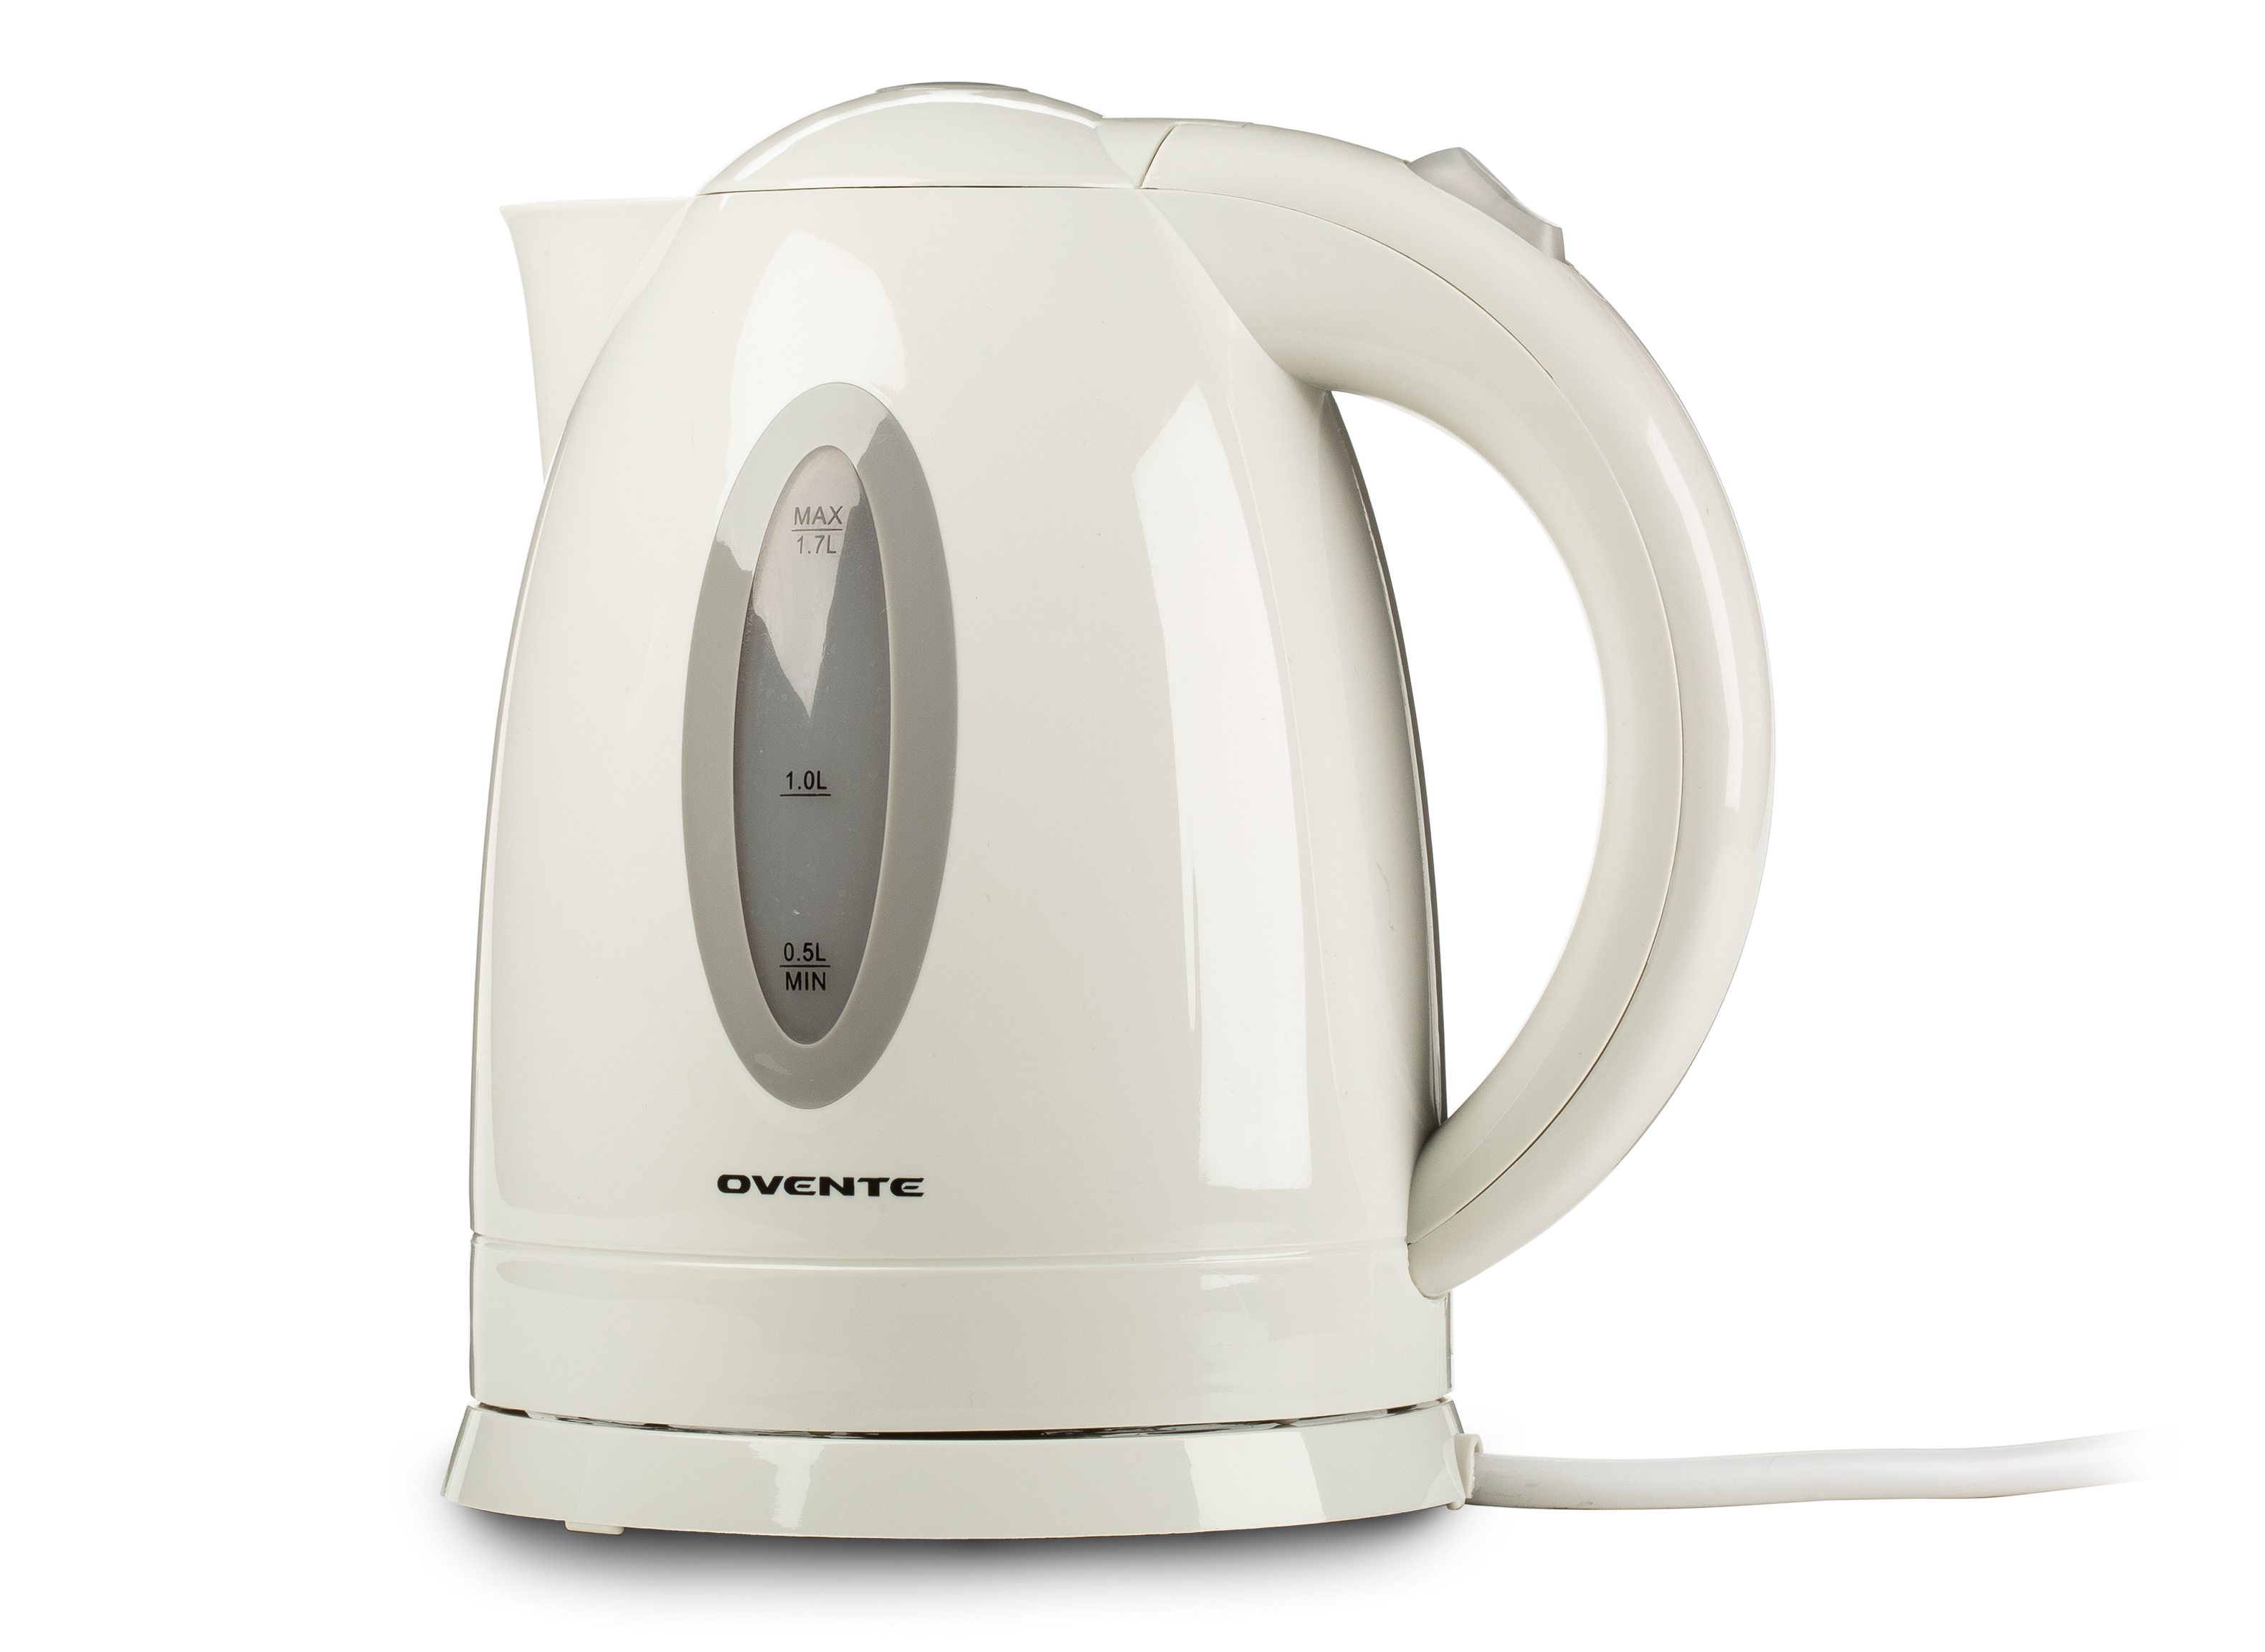 Ovente Glass Electric Kettle Review: A Perfect Pour Every Time